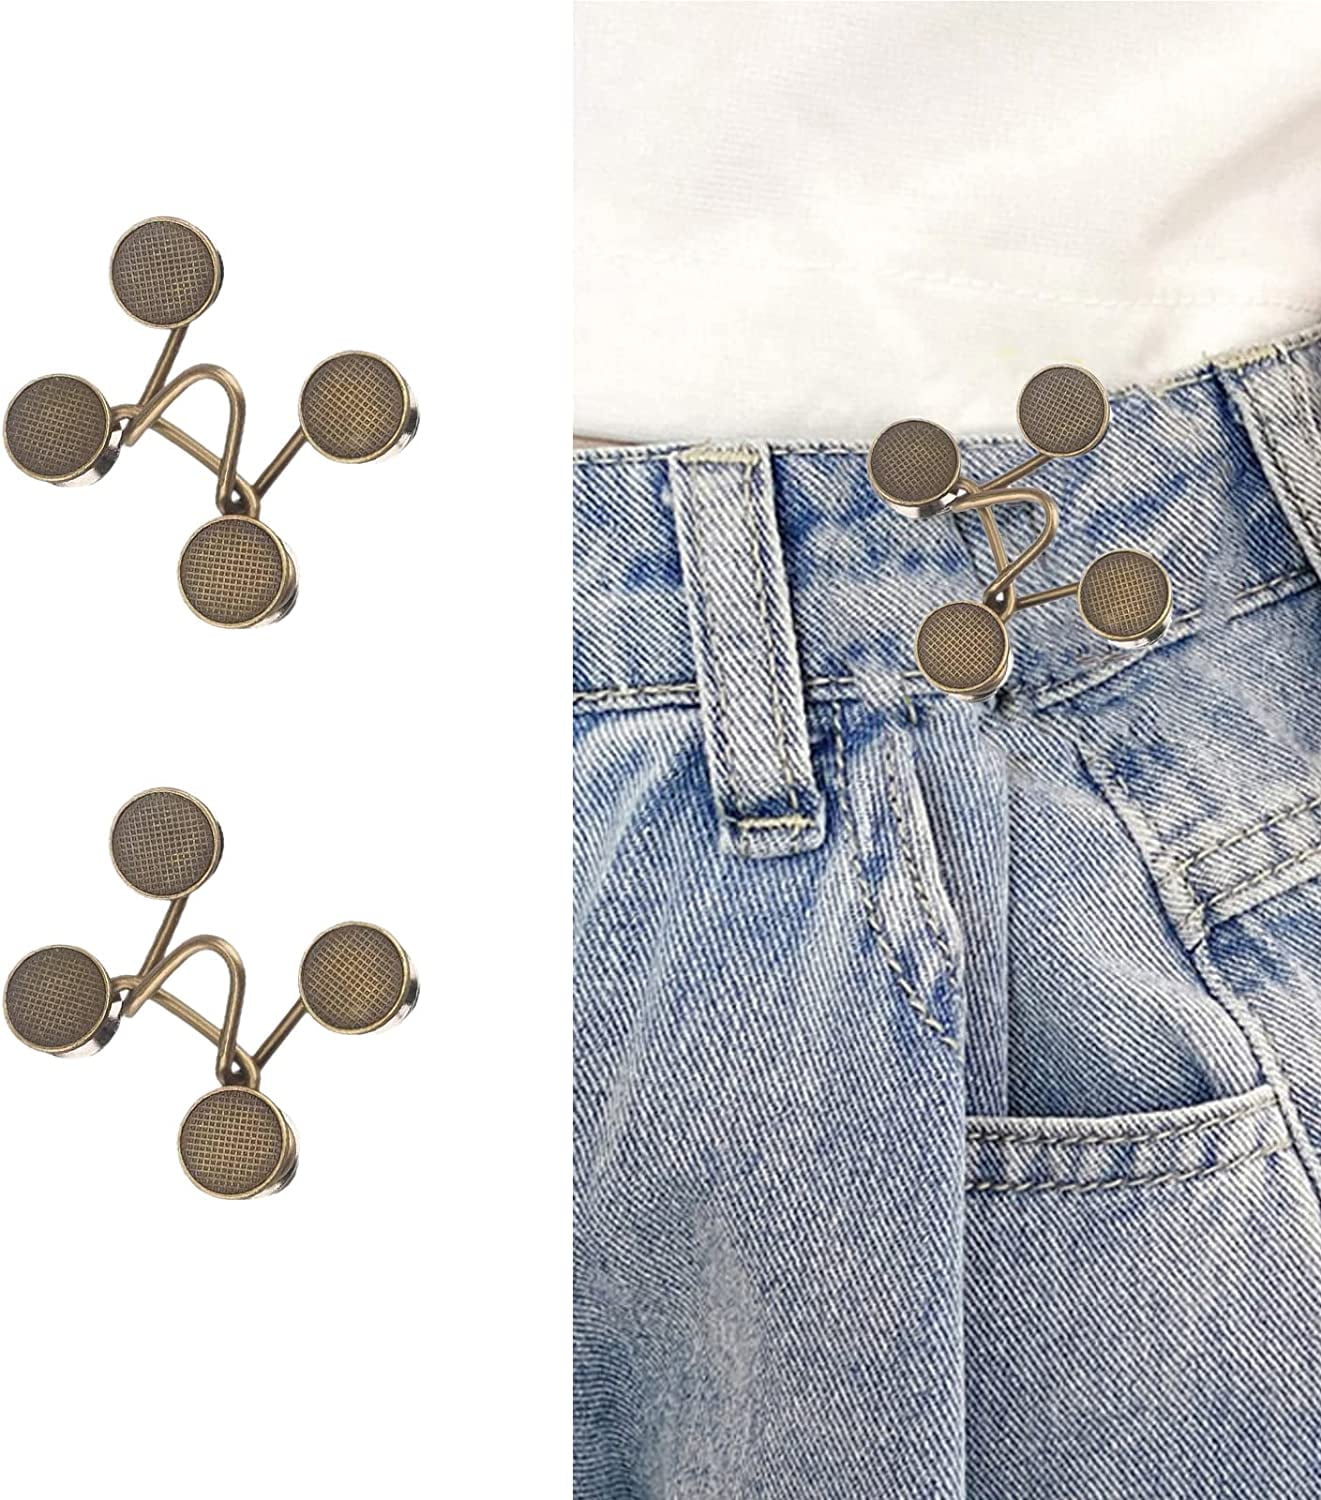 Wabjtam 2 Sets Pant Waist Tightener Instant Jean Buttons For Loose Jeans Pants Clips For Waist Detachable Jean Buttons Pins No Sewing Waistband Tighte